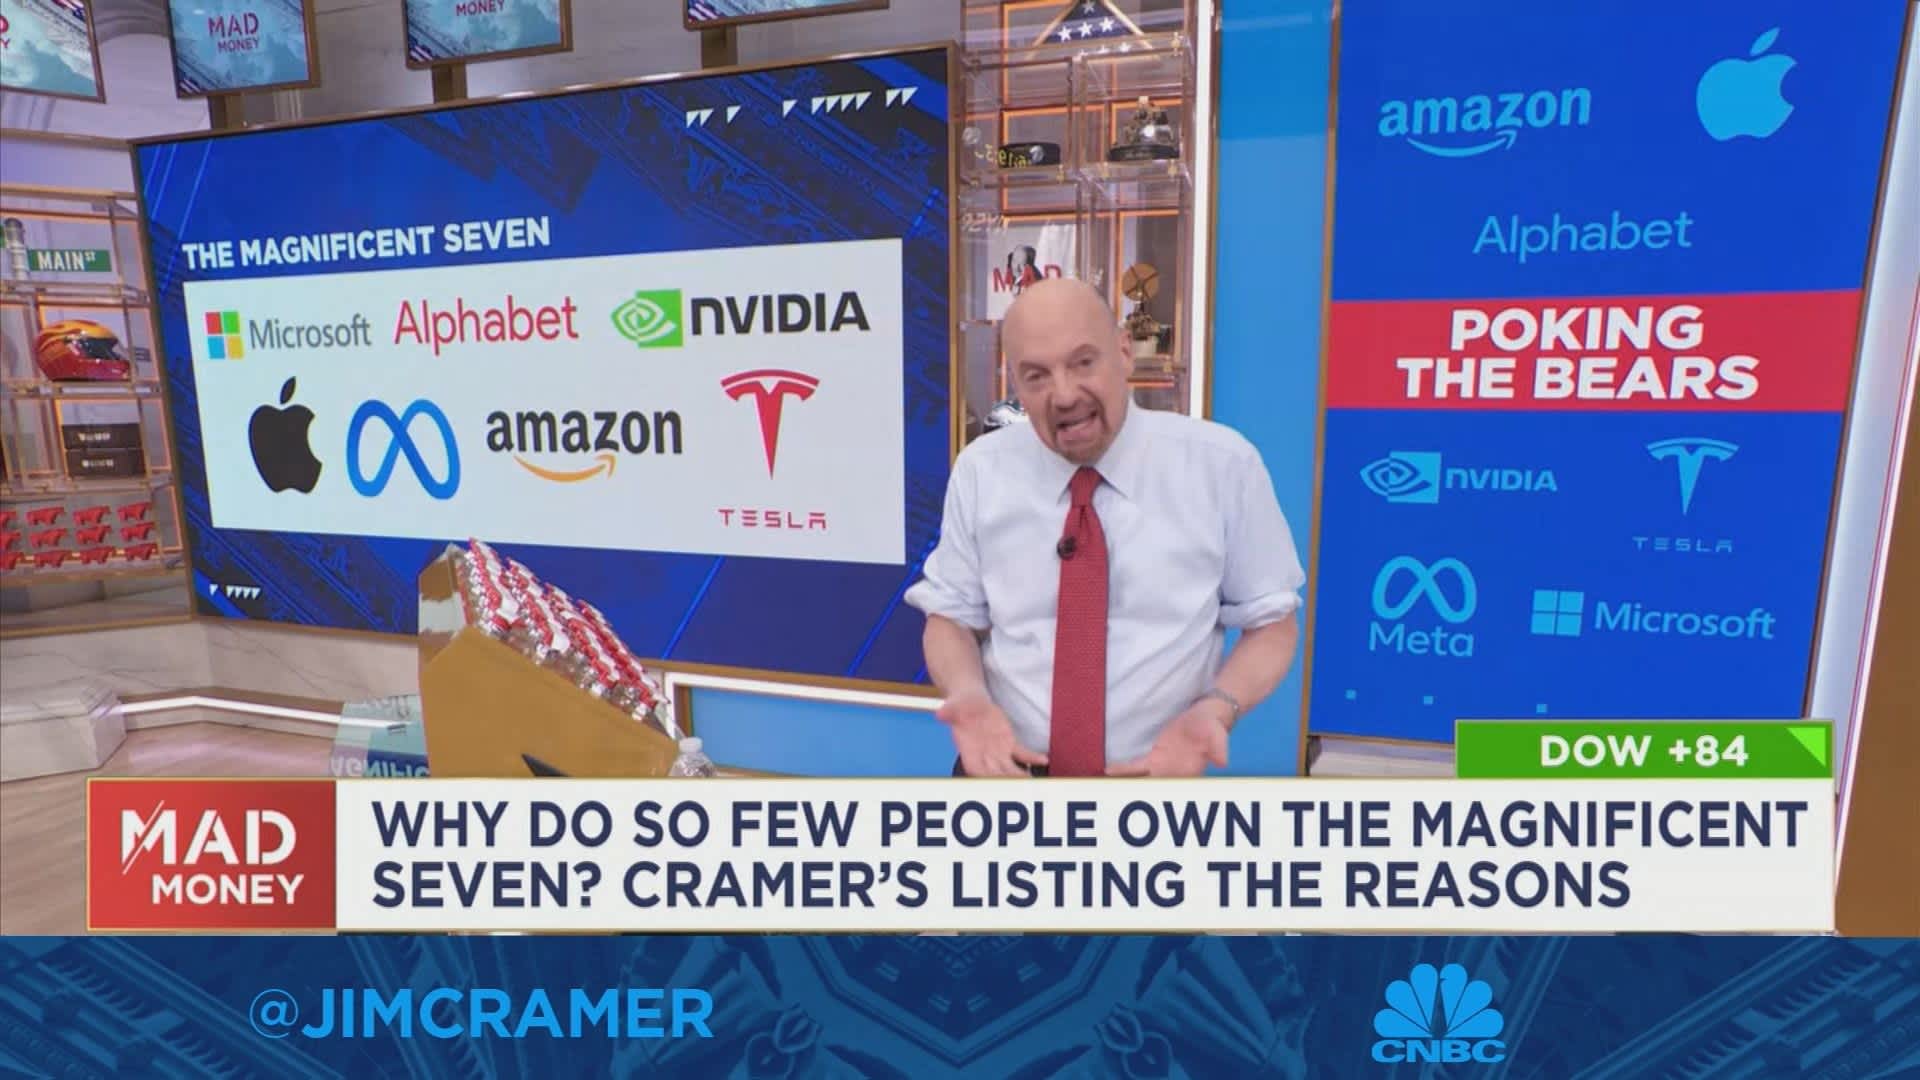 So much of the market is about the Magnificent 7, yet so few people own them, says Jim Cramer